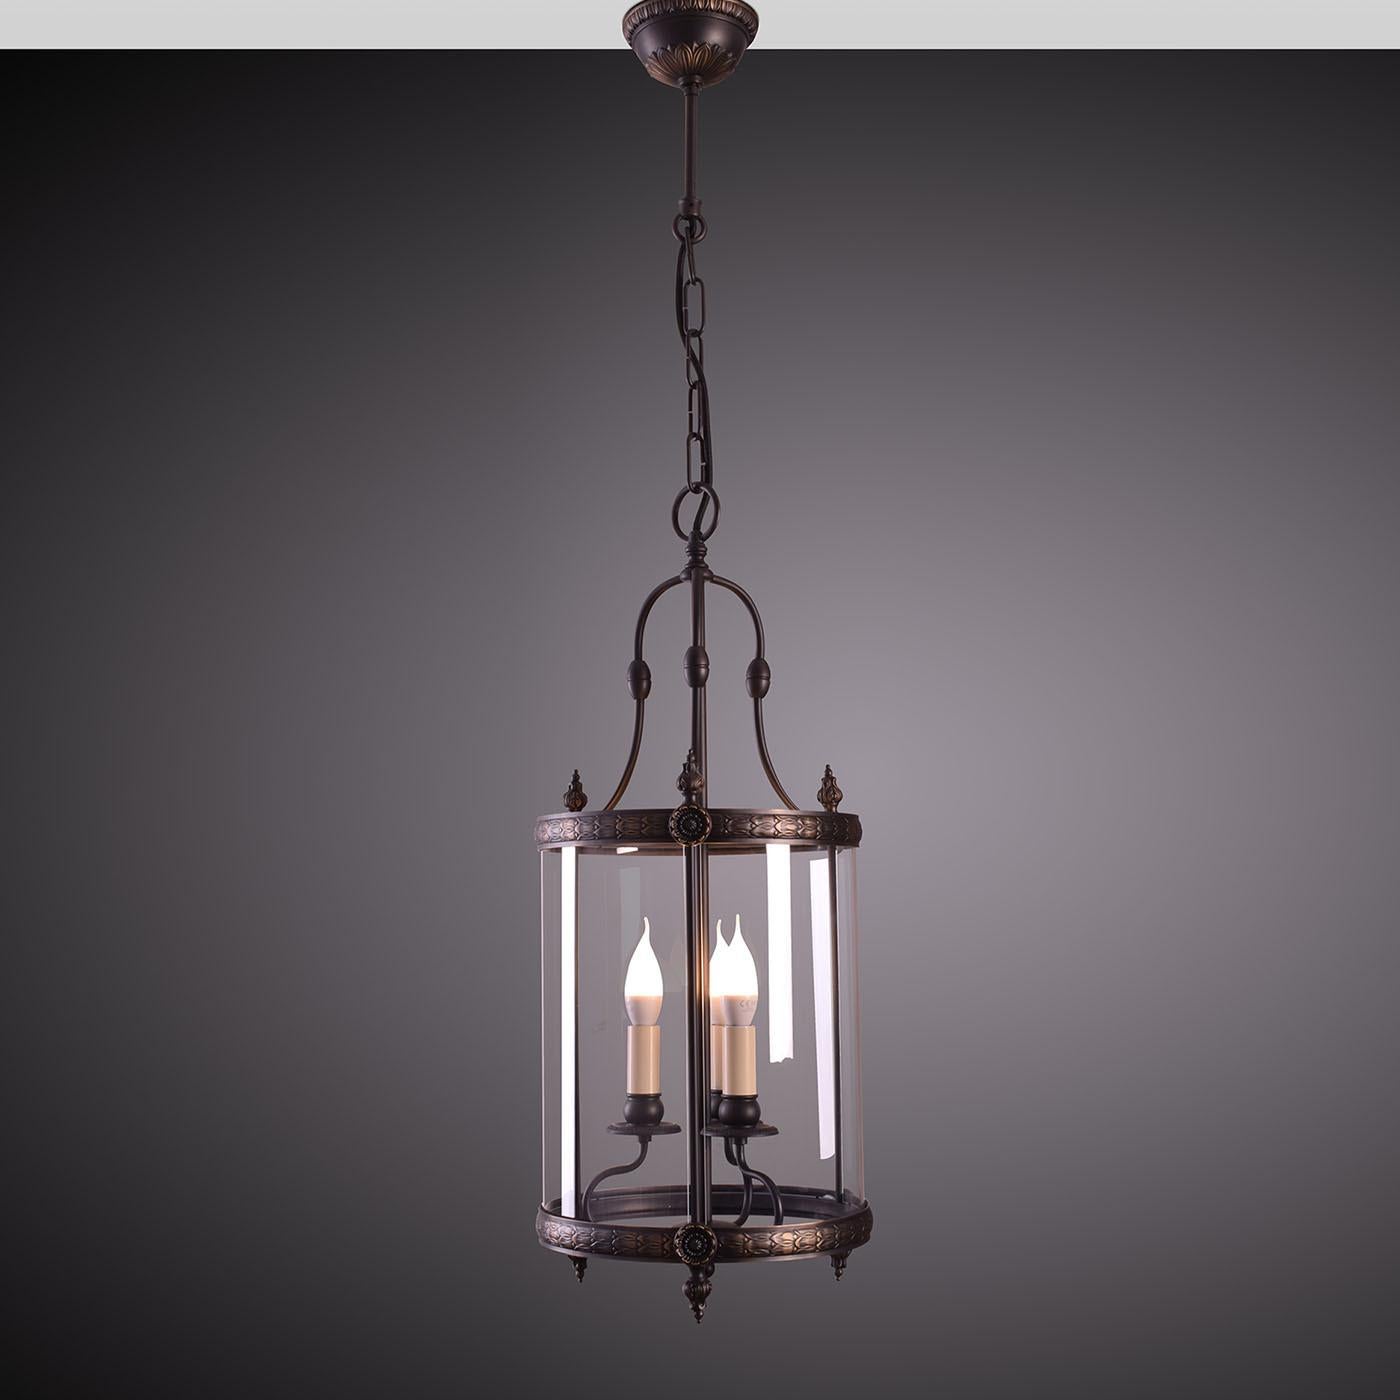 Minutely chiseled and offered in a precious antiqued bronze-veil finish, this pendant lantern is an apt member of the Lucerna Collection of designs of unmistakable classic inspiration. Black fabric cables complete the elegant structure, equipped